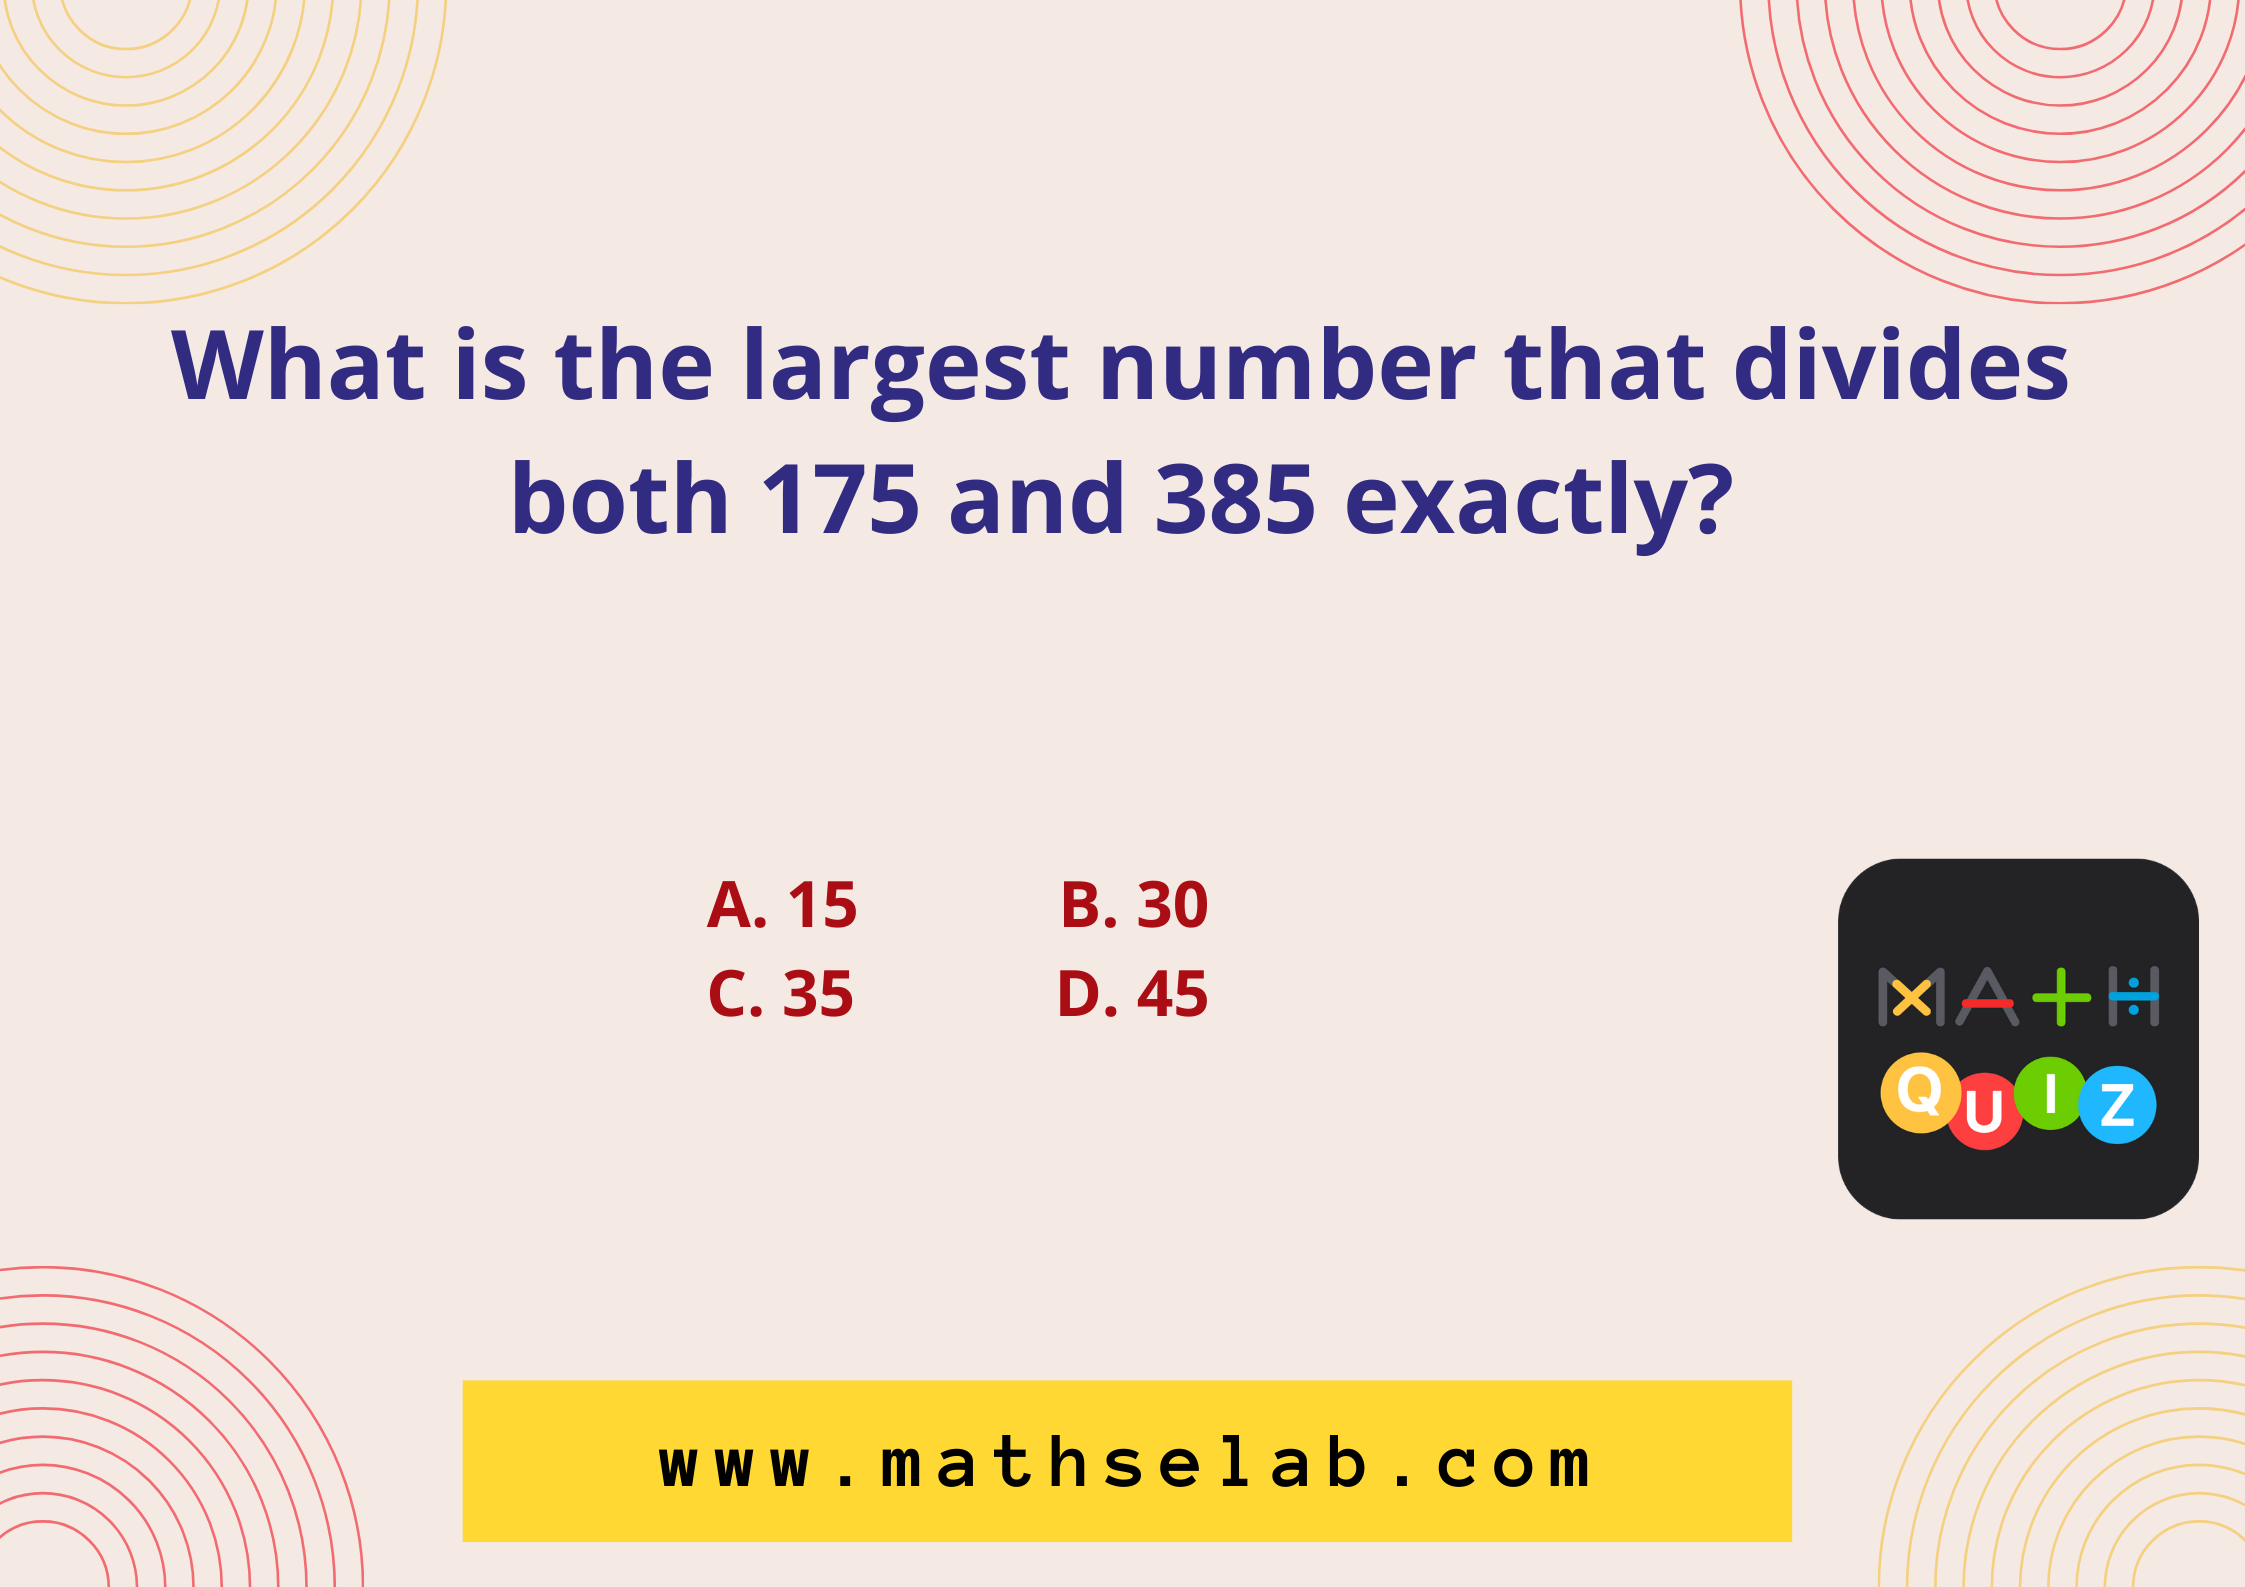 What is the largest number that divides both 175 and 385 exactly - mathselab.com